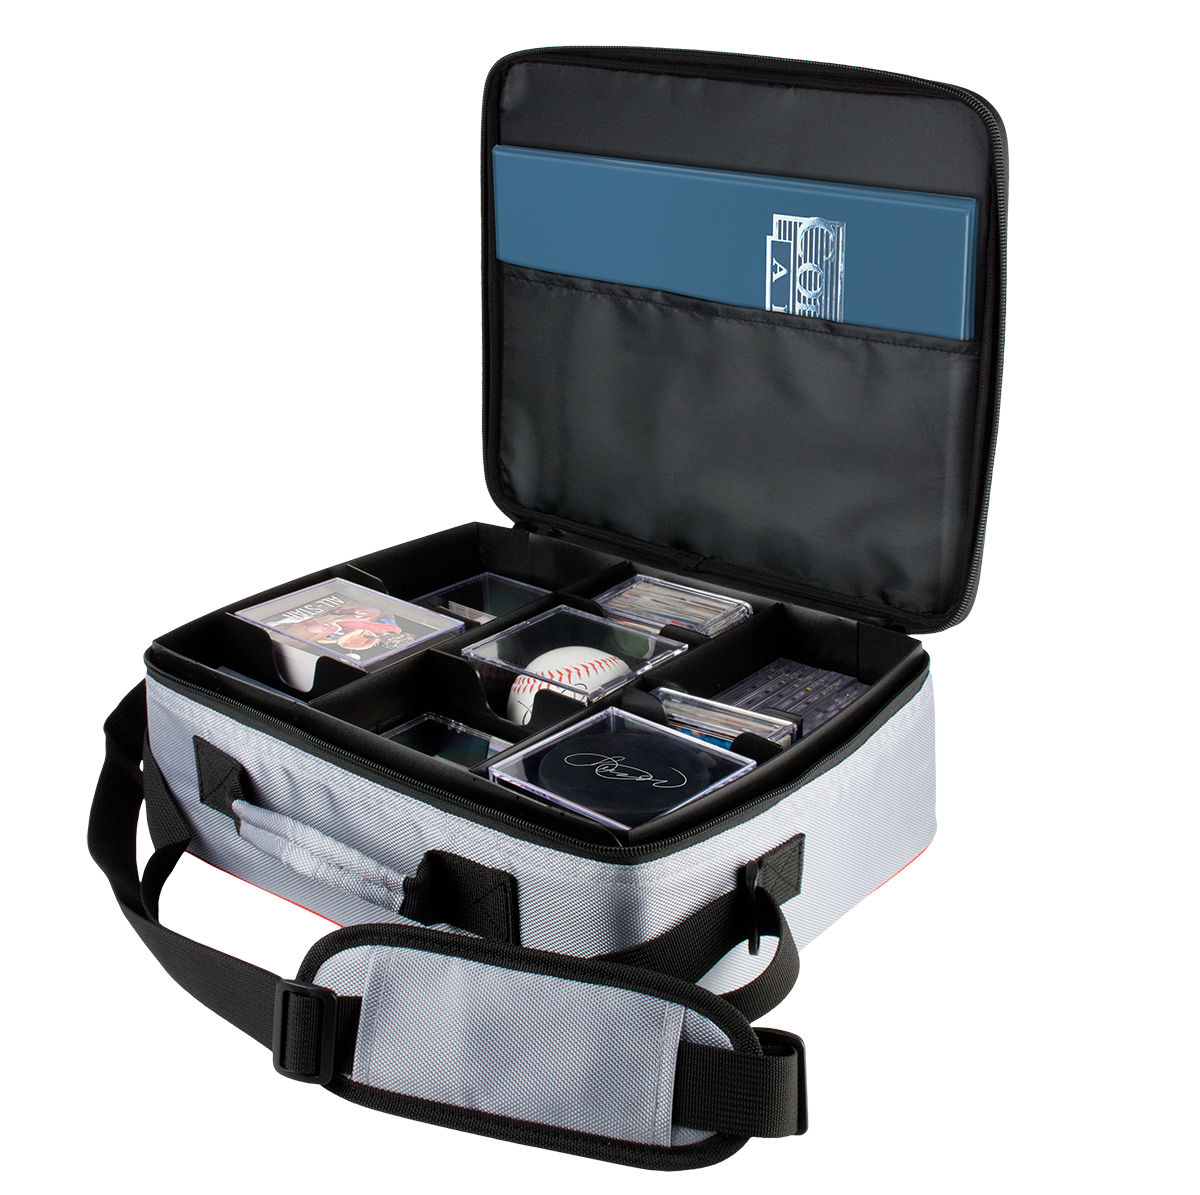 Ultra PRO: Carrying Case - Collectors Deluxe | Red Riot Games CA